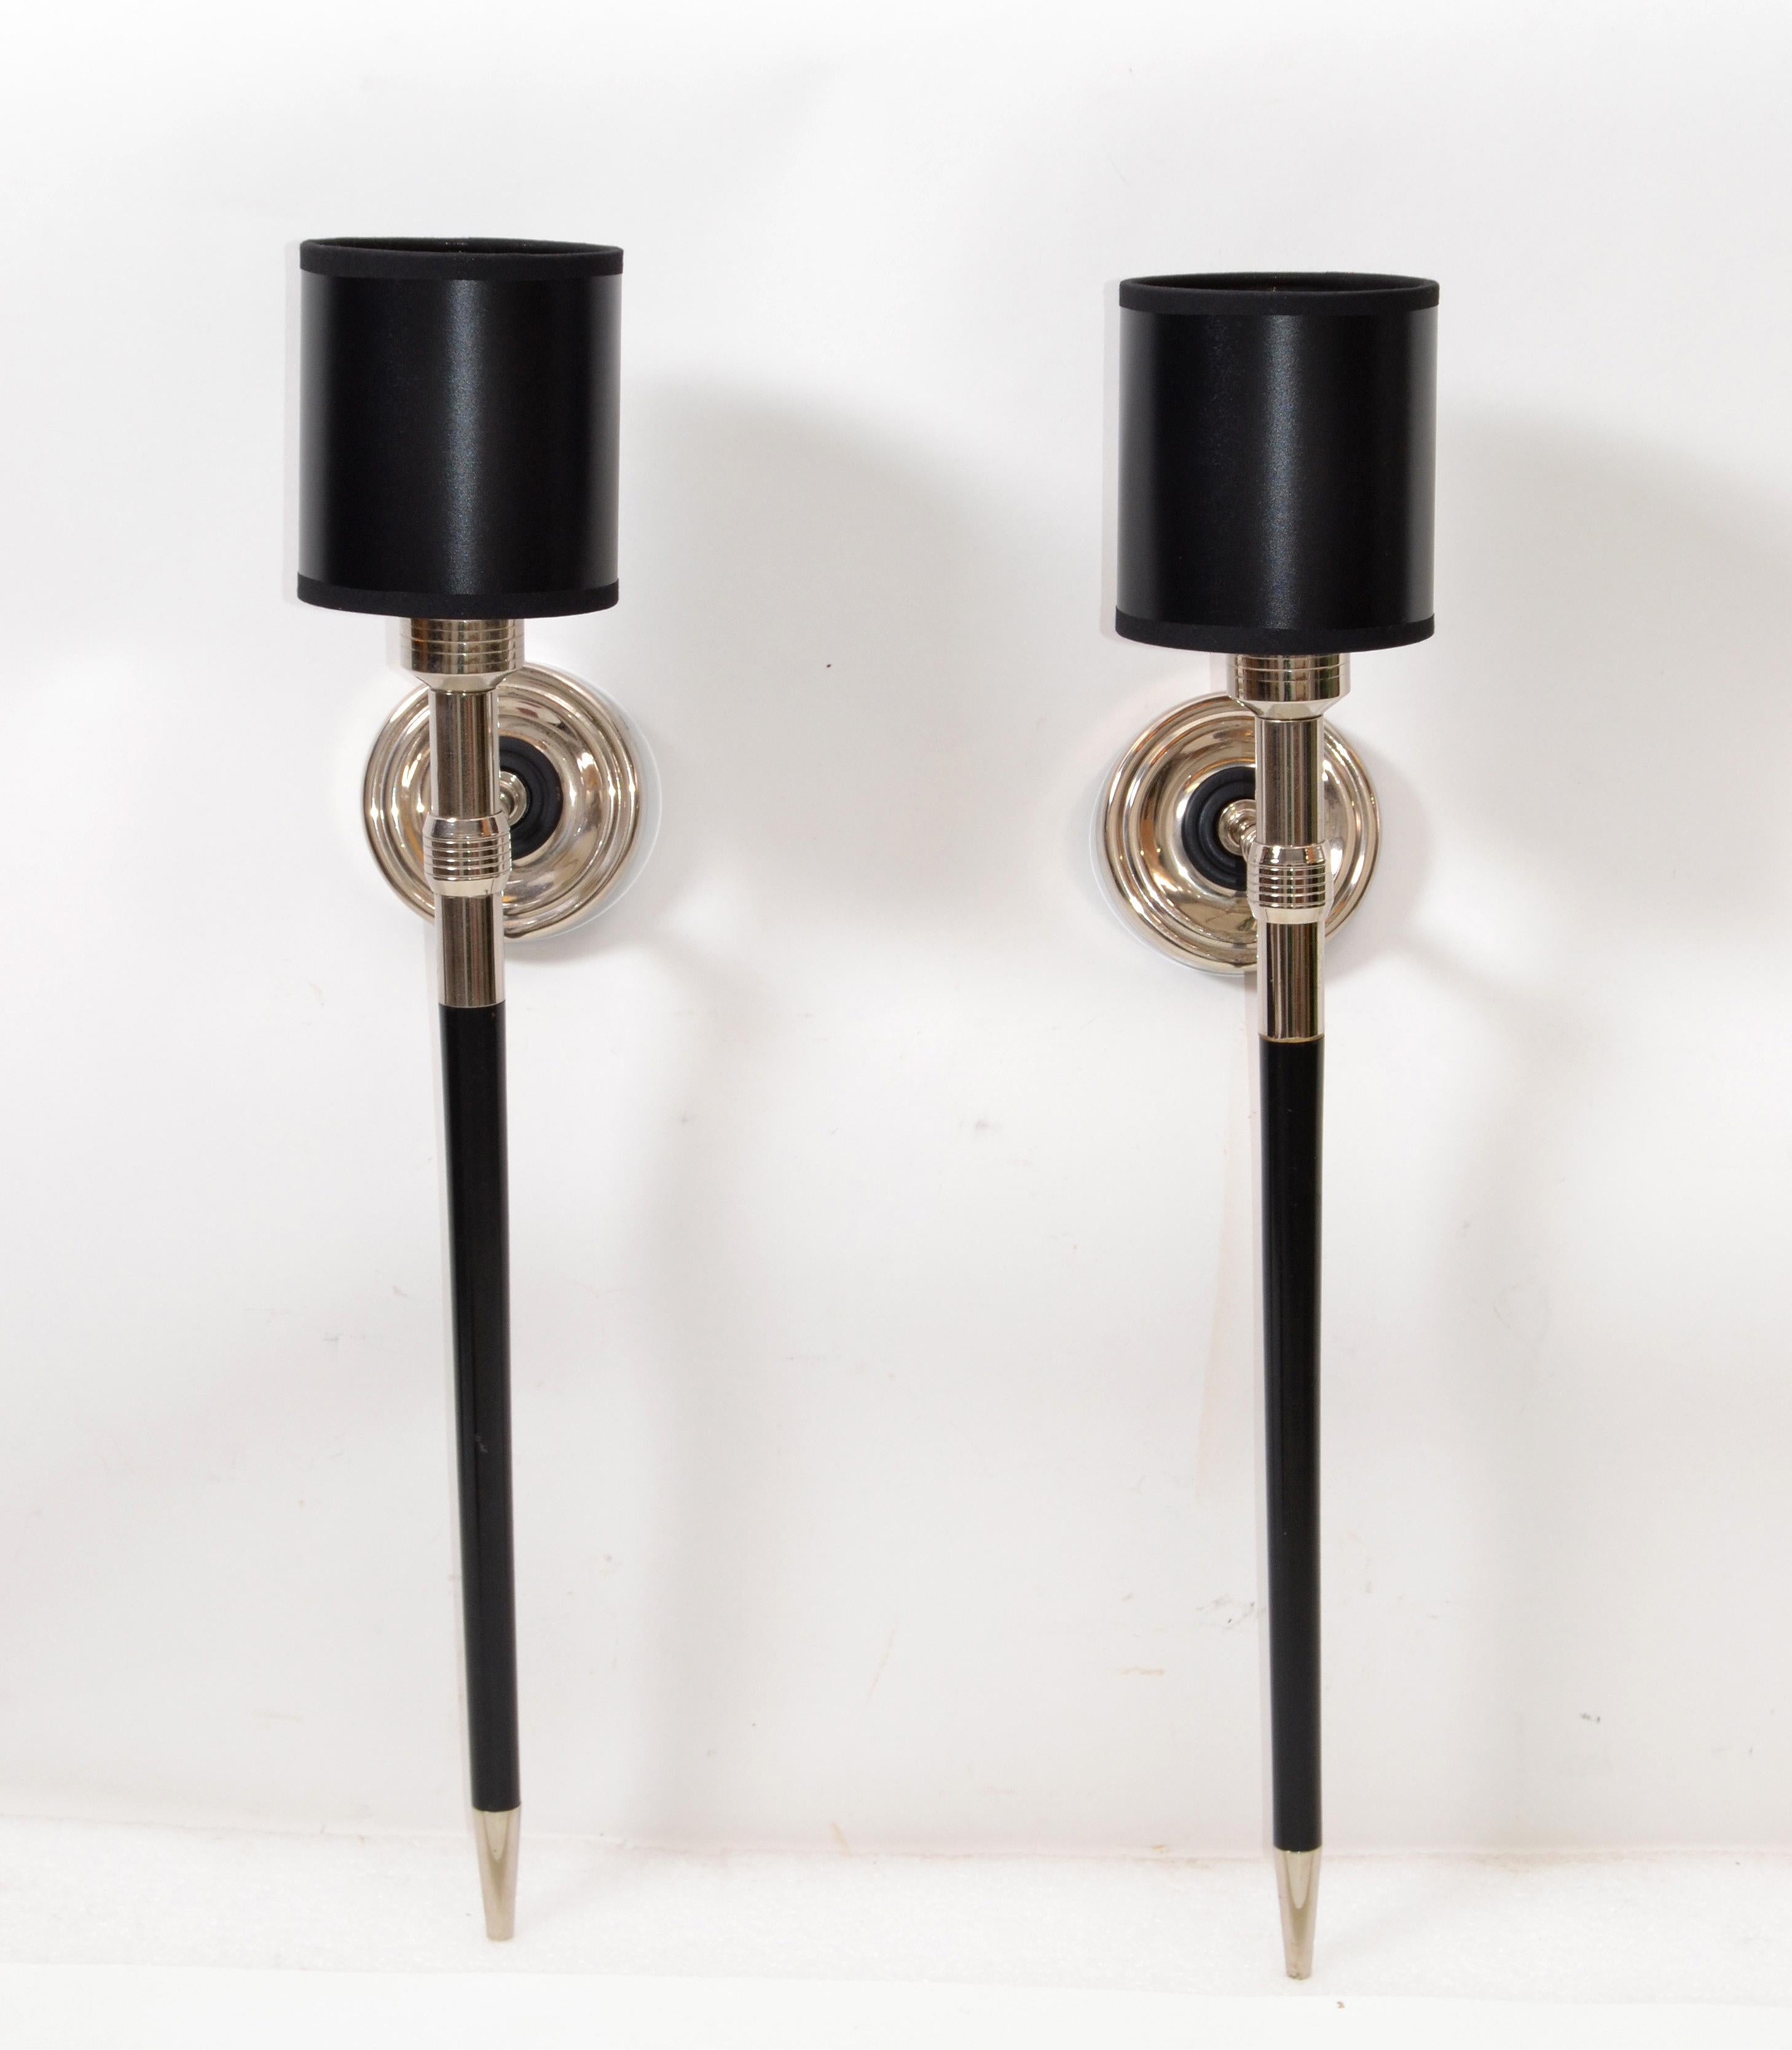 Very elegant pair of circa 1960 chrome and black wood sconces for Maison Lancel, France.
Wired for US and in working condition. Each wall sconce takes 1-light bulb with max. 40 watts.
Back plate: 3.75 inches diameter
Shades are included if